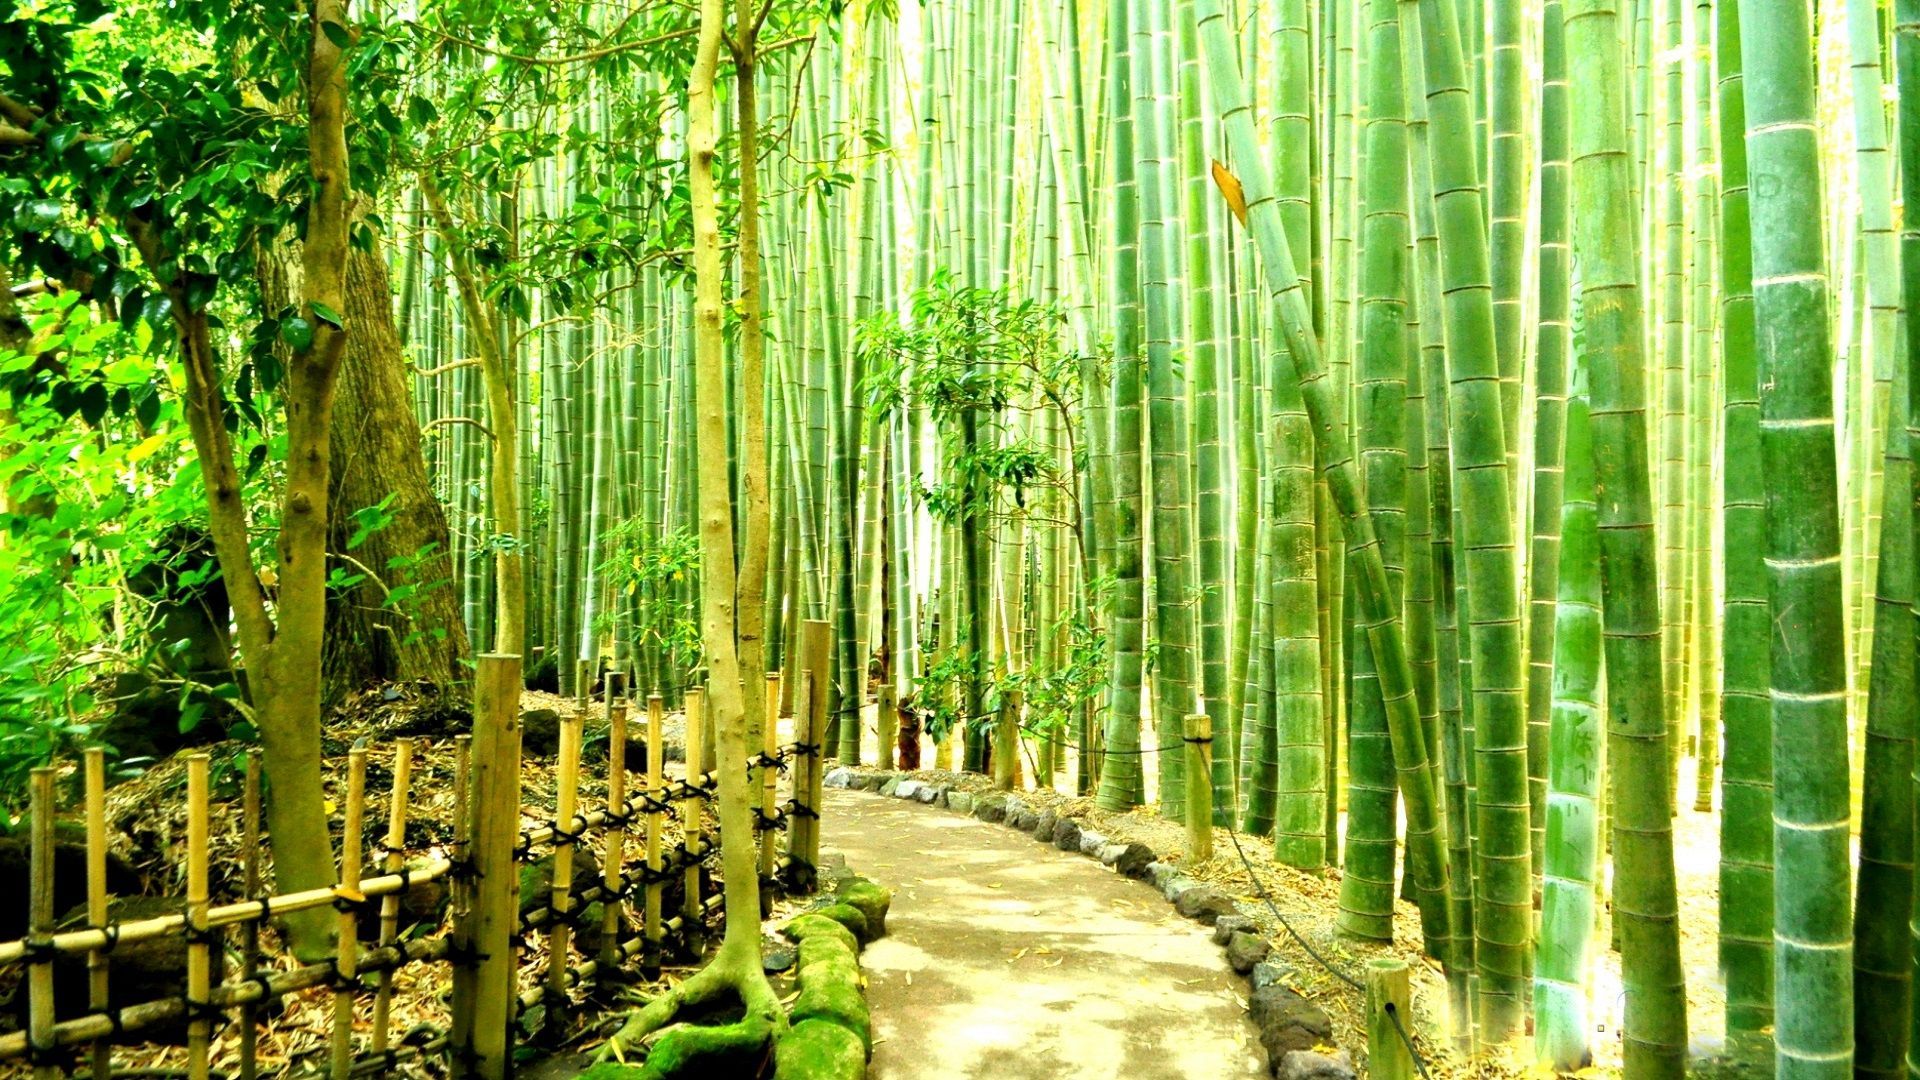 Bamboo Forest Wallpaper 42 HD Image Good Vibes Radio